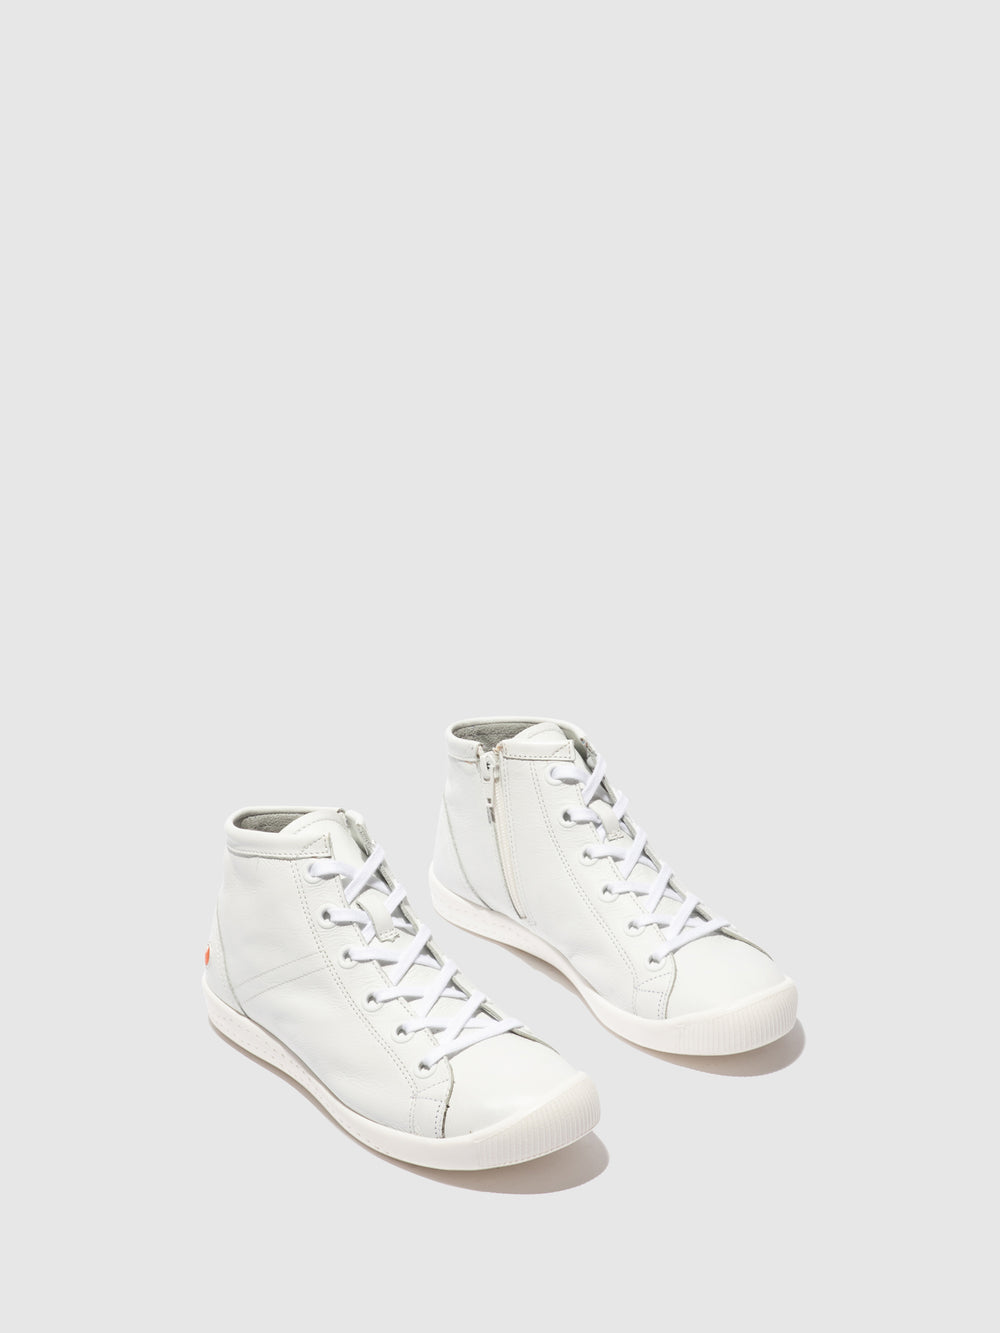 Lace-up Ankle Boots ISLEENIII747 WHITE